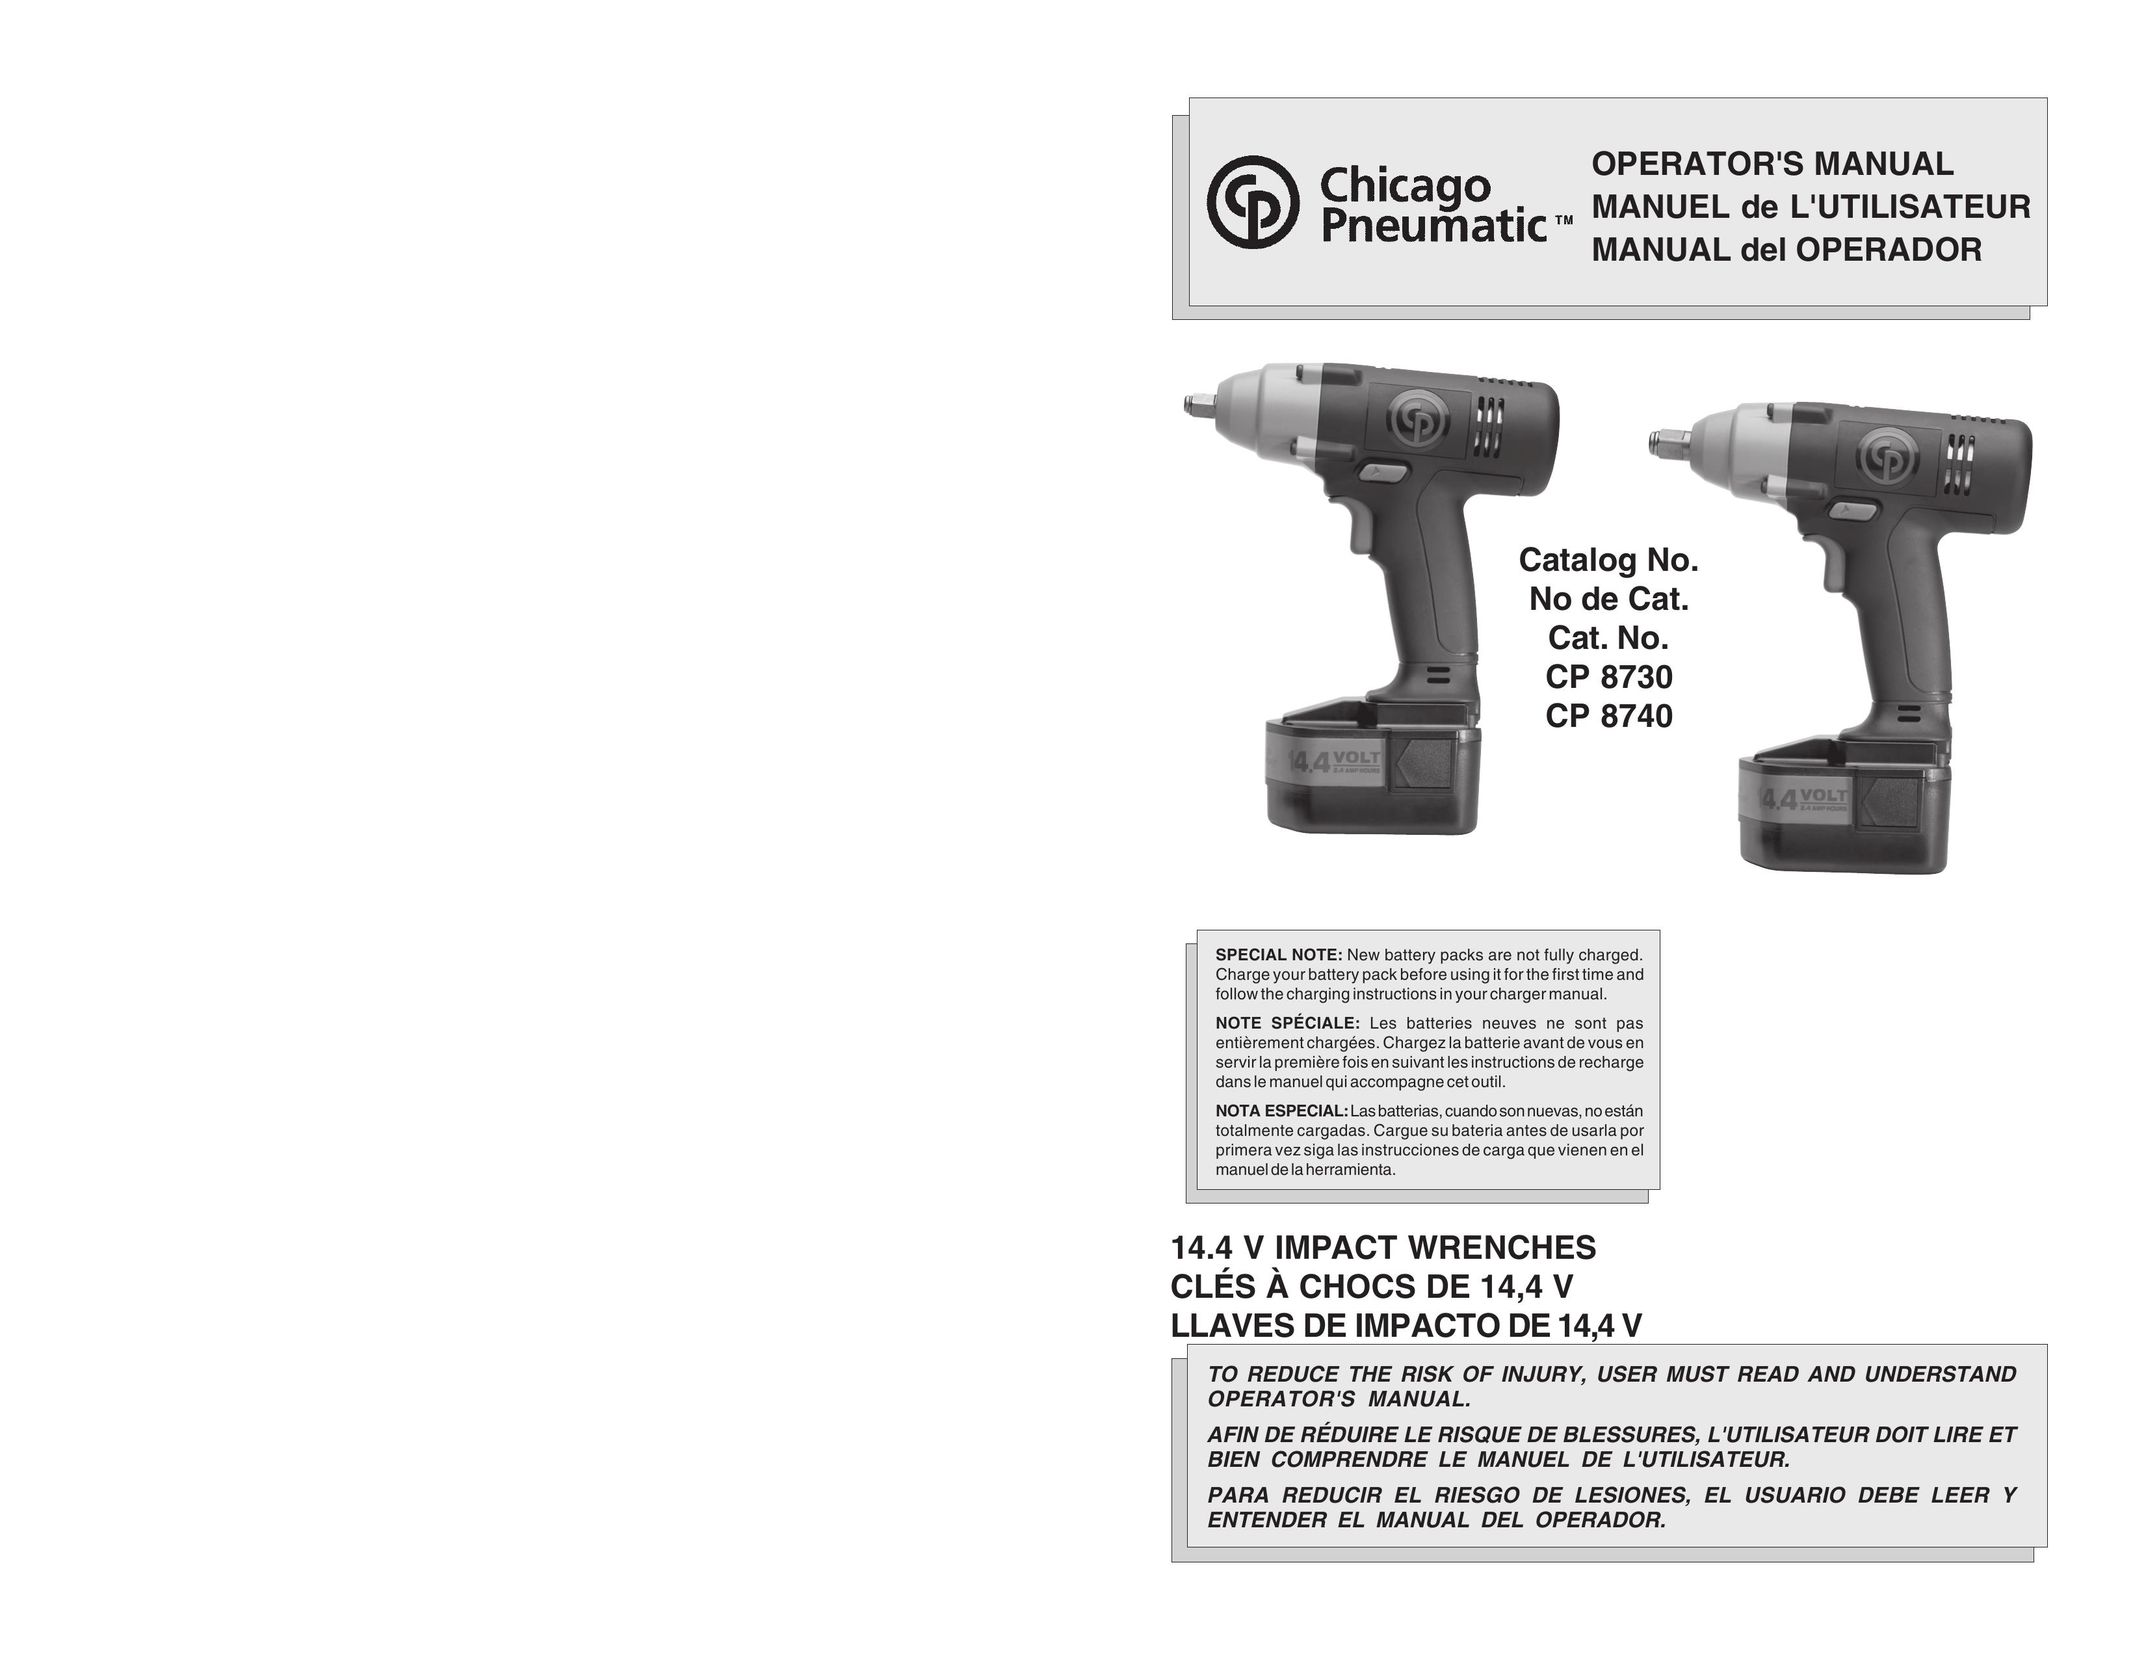 Chicago Pneumatic CP 8730 Cordless Drill User Manual